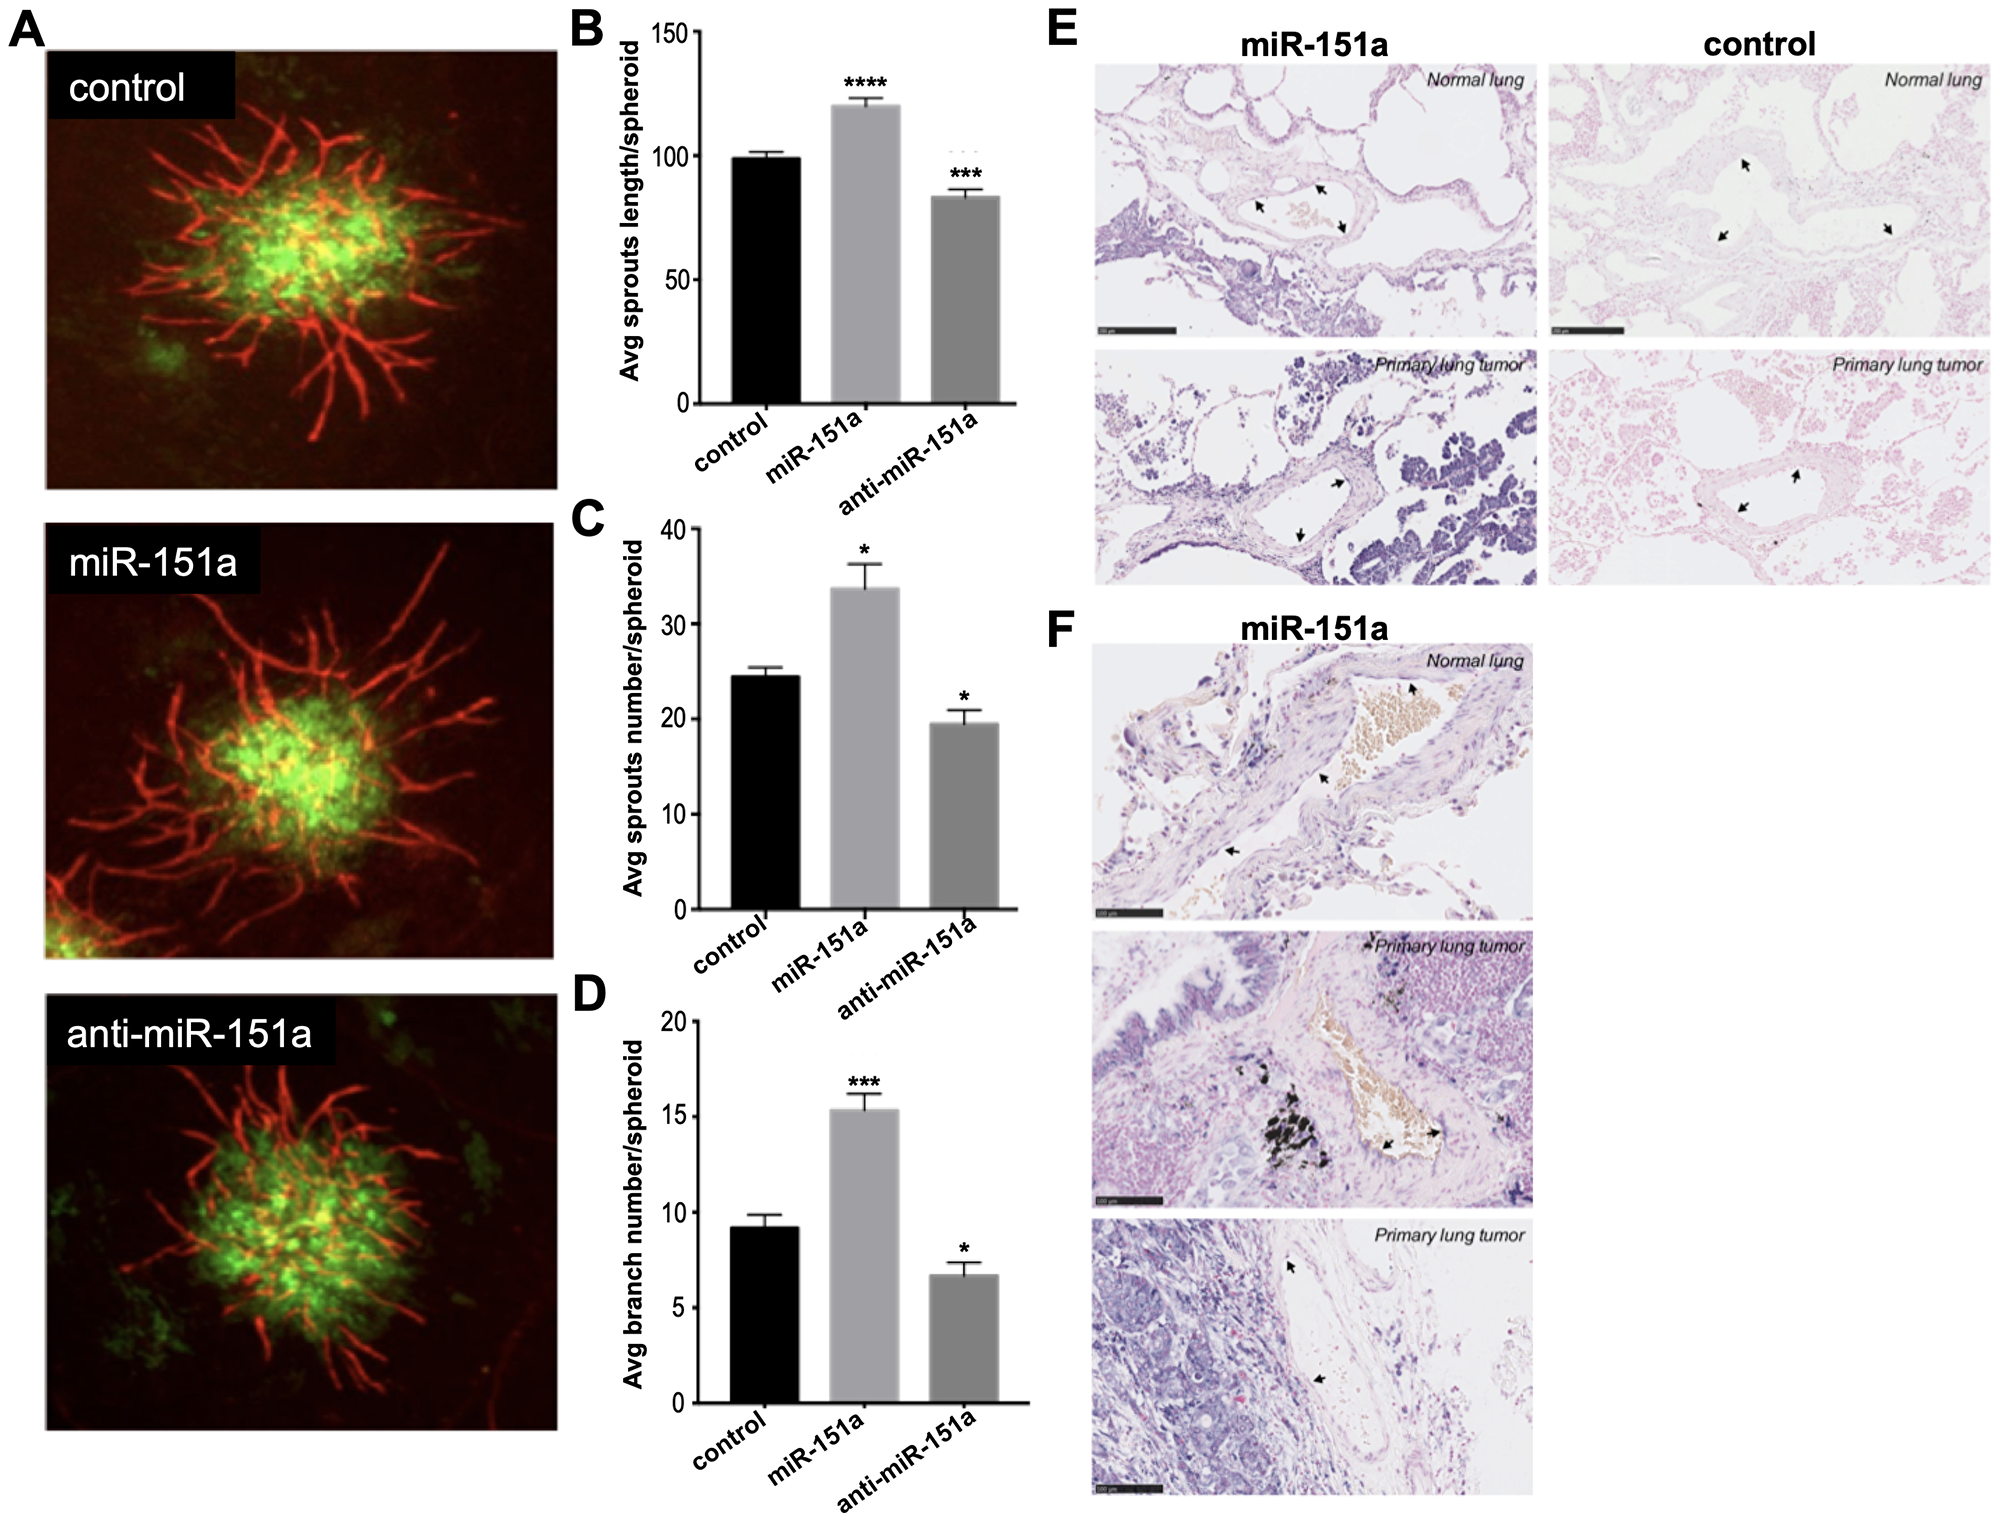 Figure 5: miR-151a enhances angiogenesis in 3D vascularized lung tumor spheroids and is expressed in vasculature of NSCLC patient specimens.